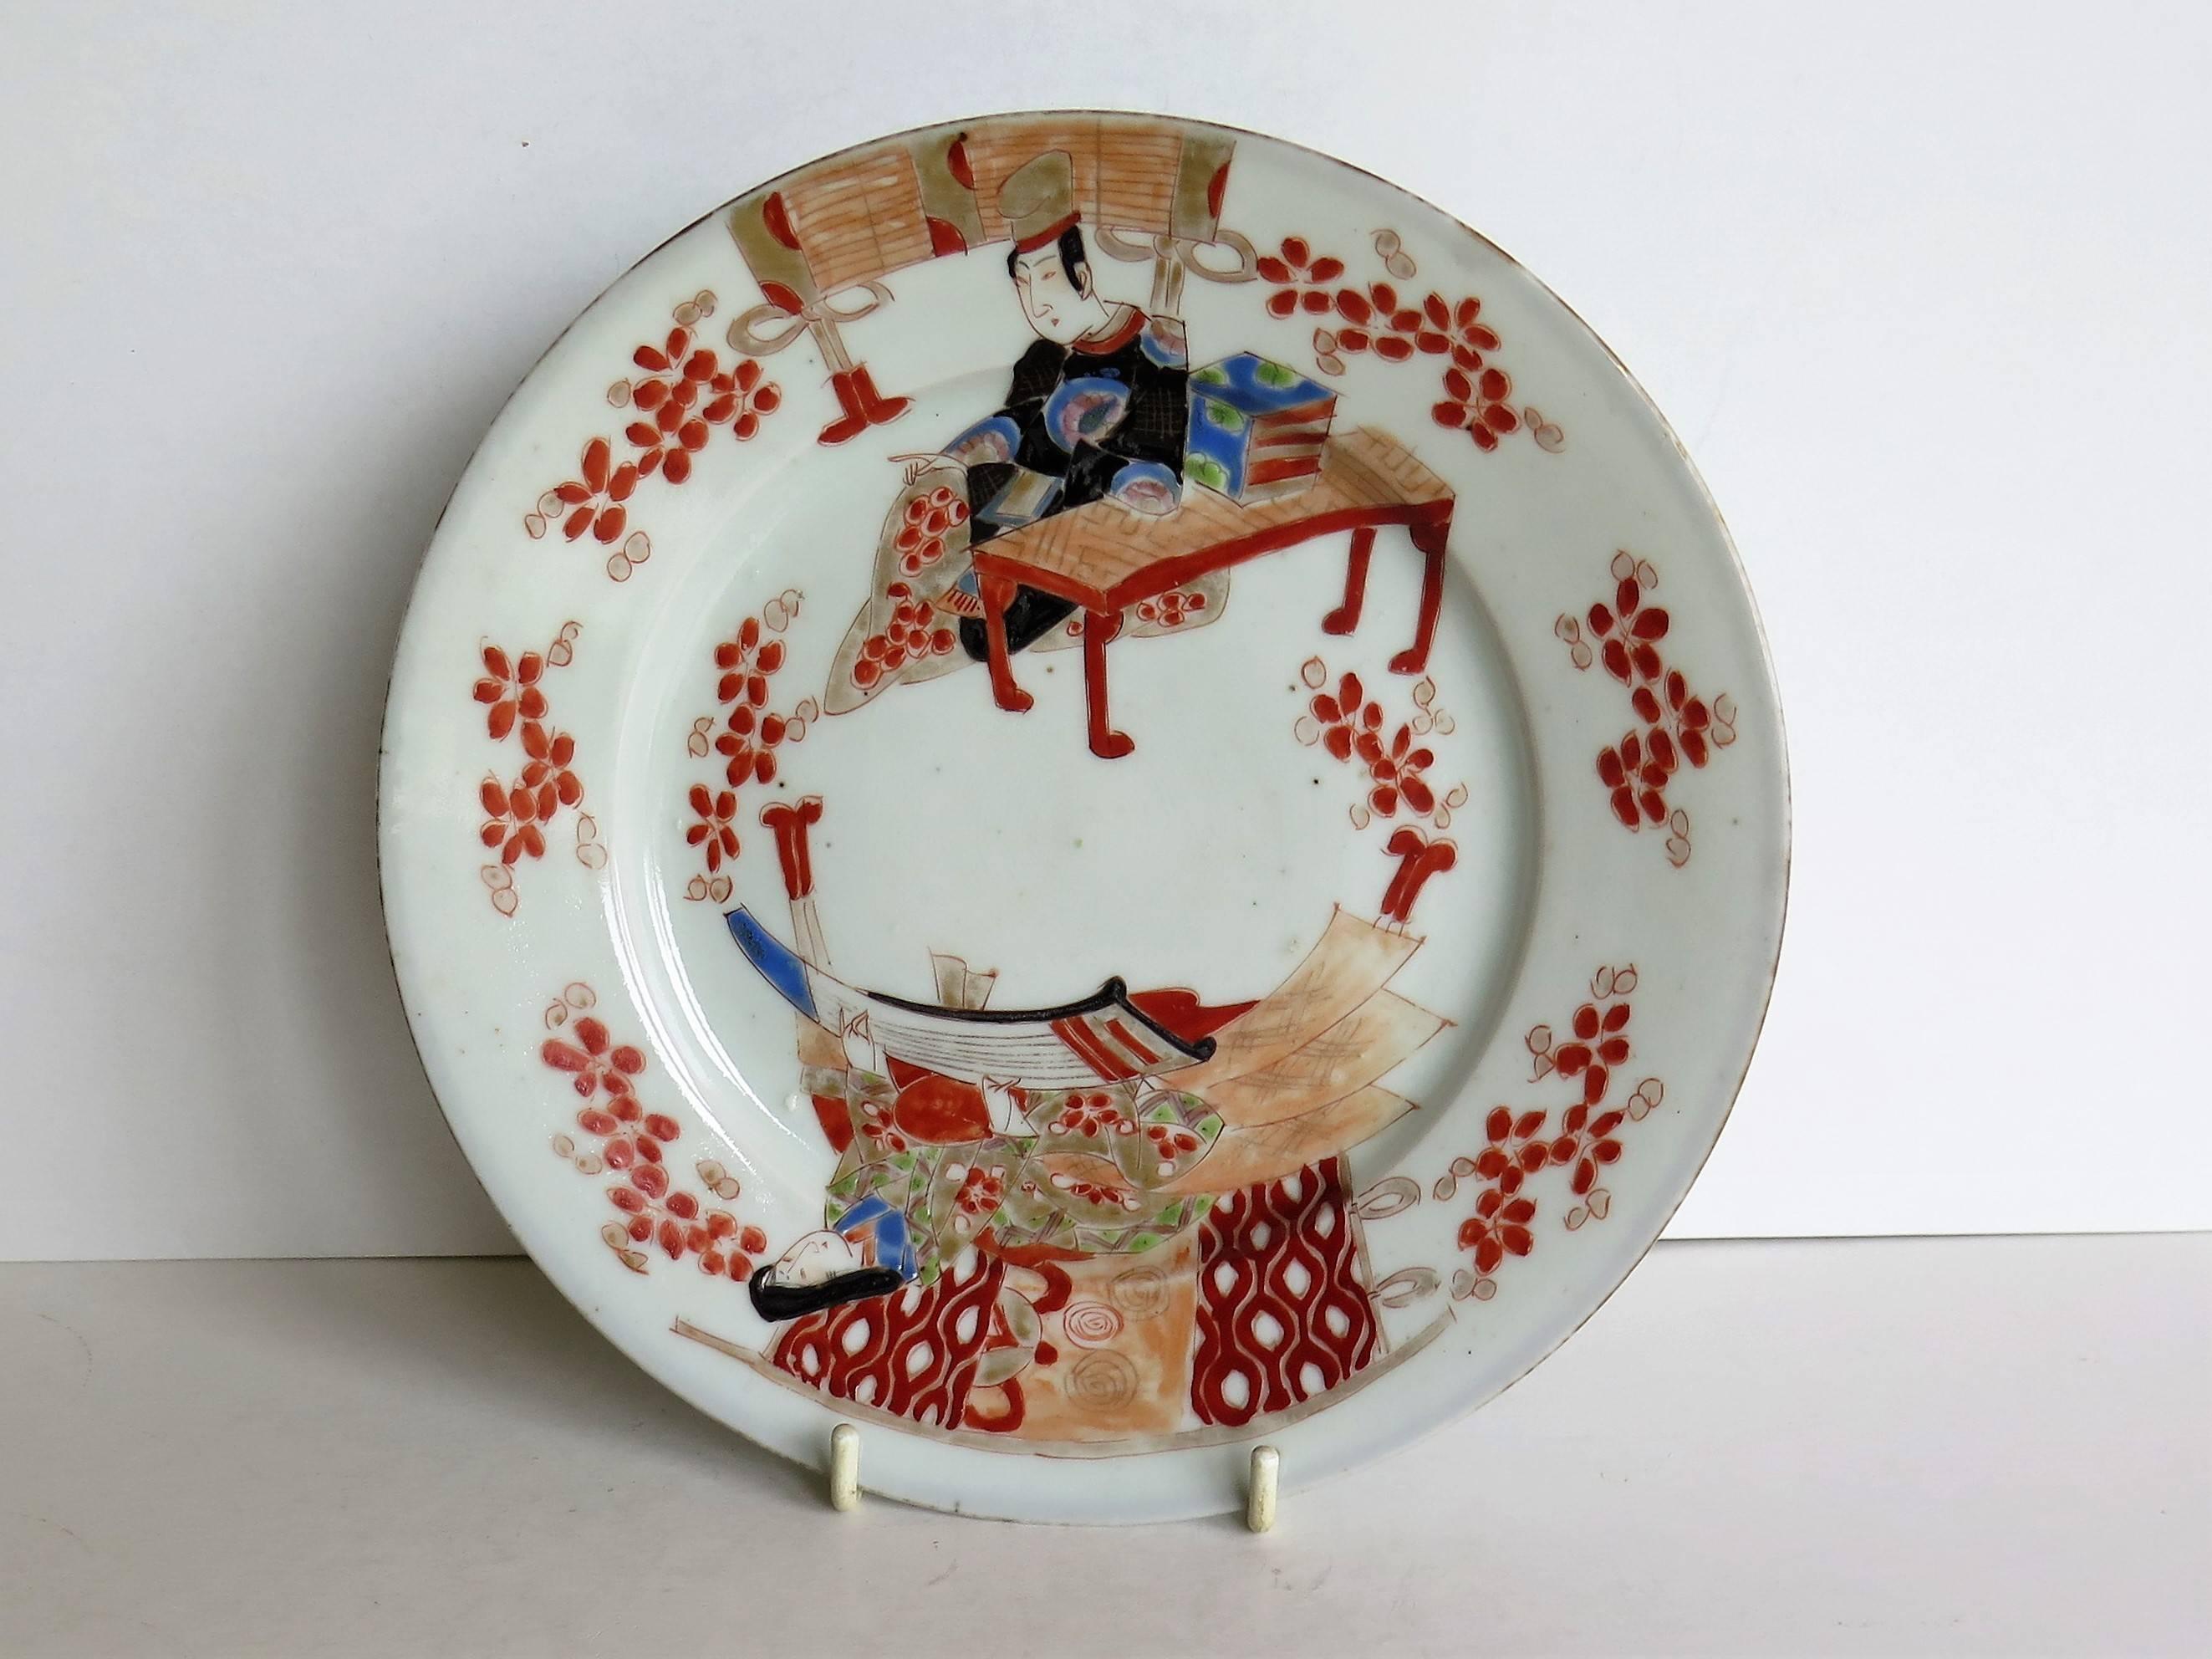 This is an unusual Japanese porcelain plate or dish which we date to the 19th century, Meiji period, circa 1880.

The porcelain plate is circular with a double base foot rim which is unusual.

The decoration shows a man and a woman sat at two